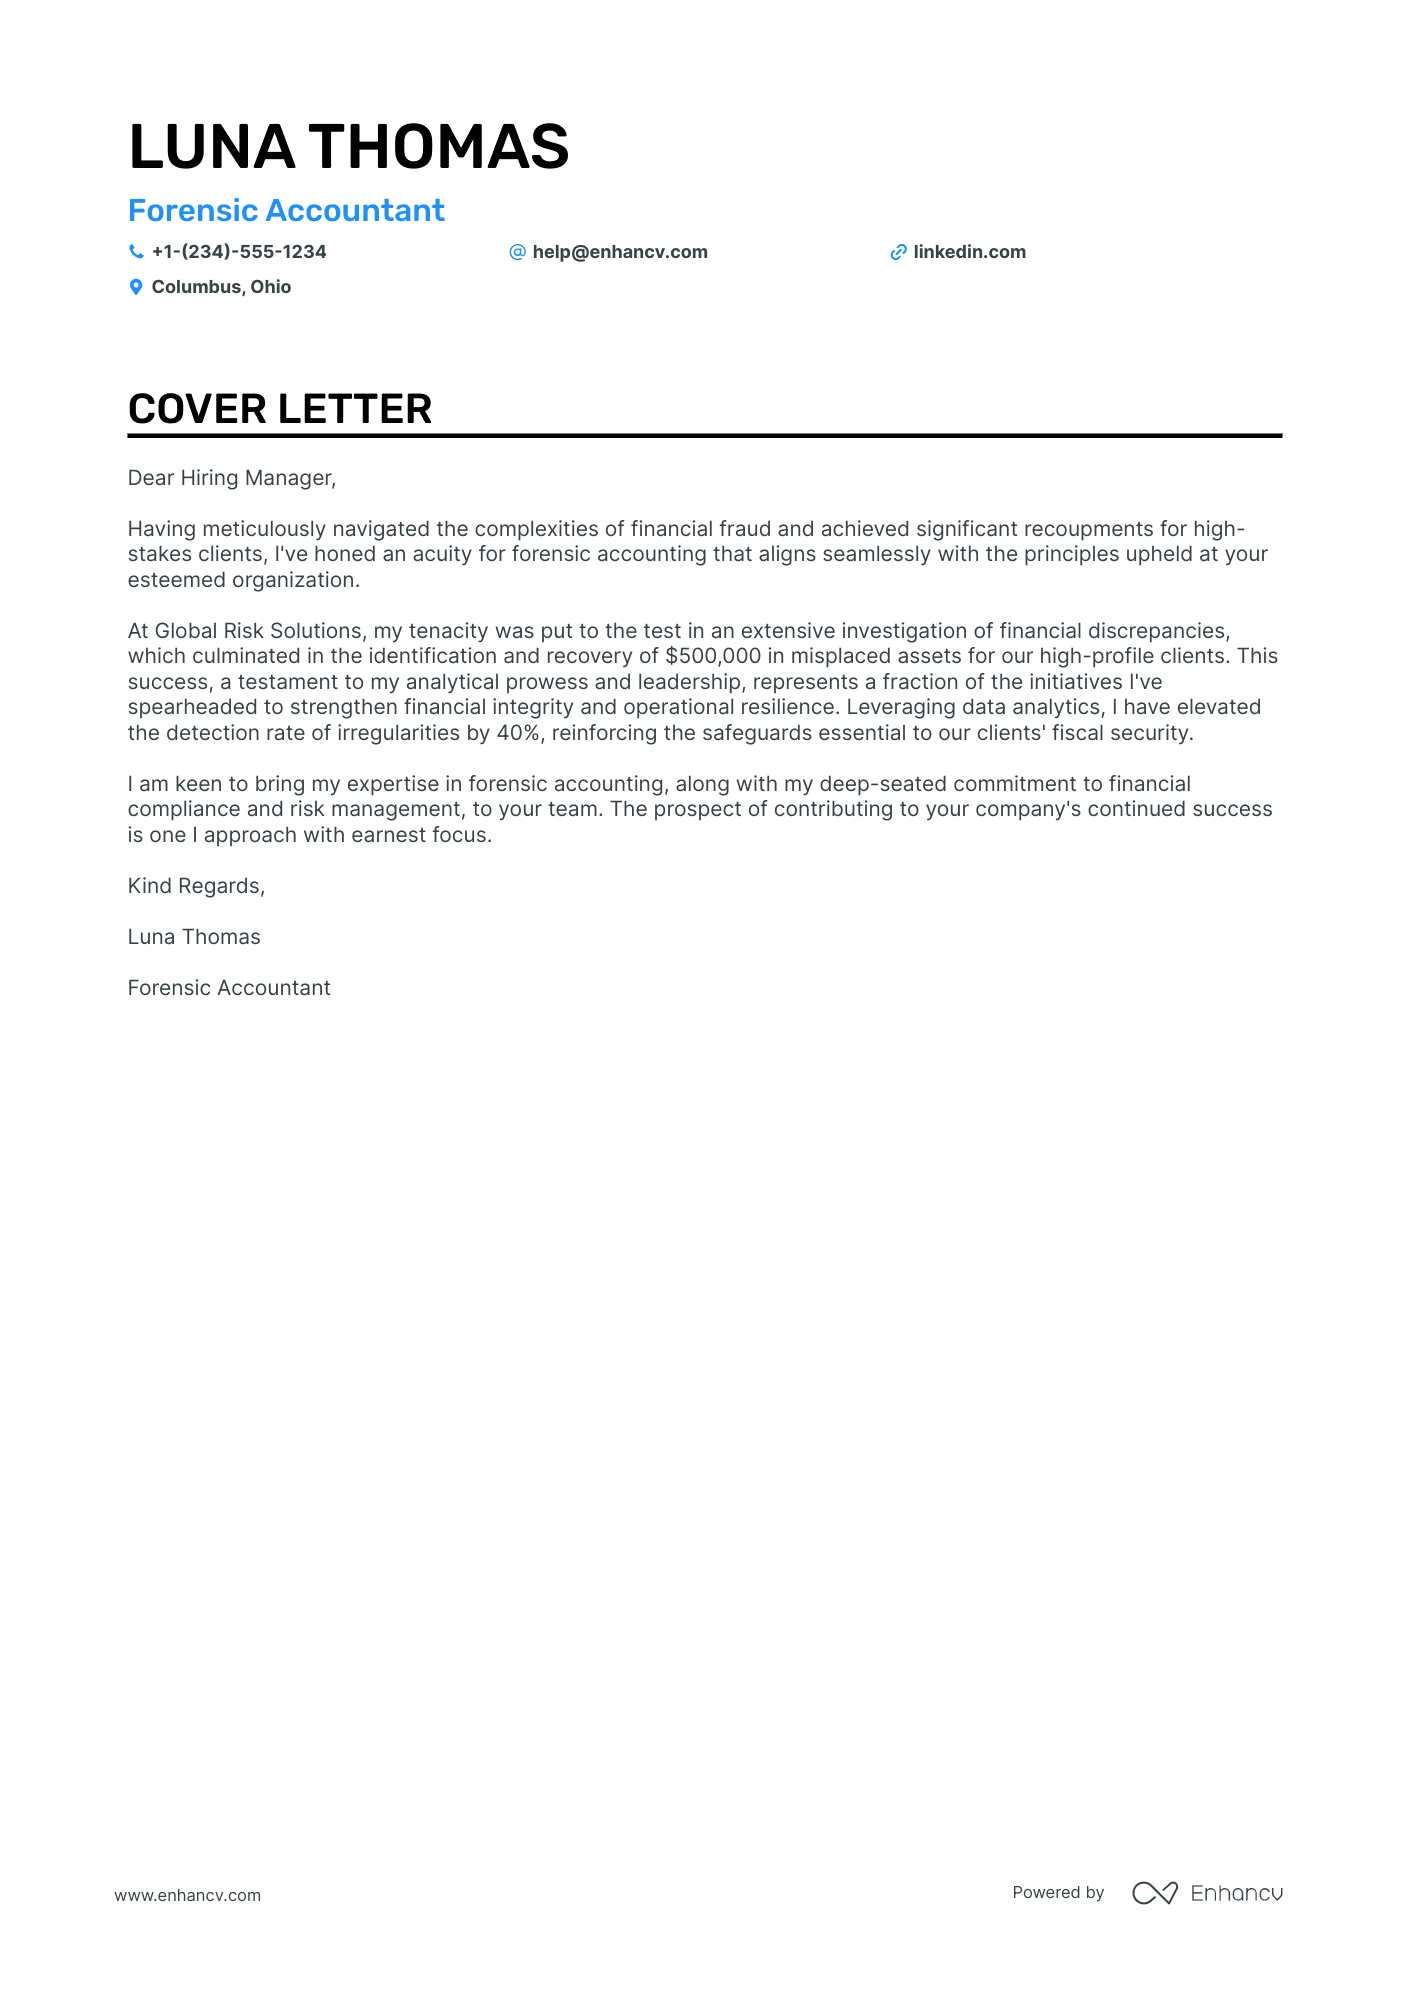 accountant cover letter template